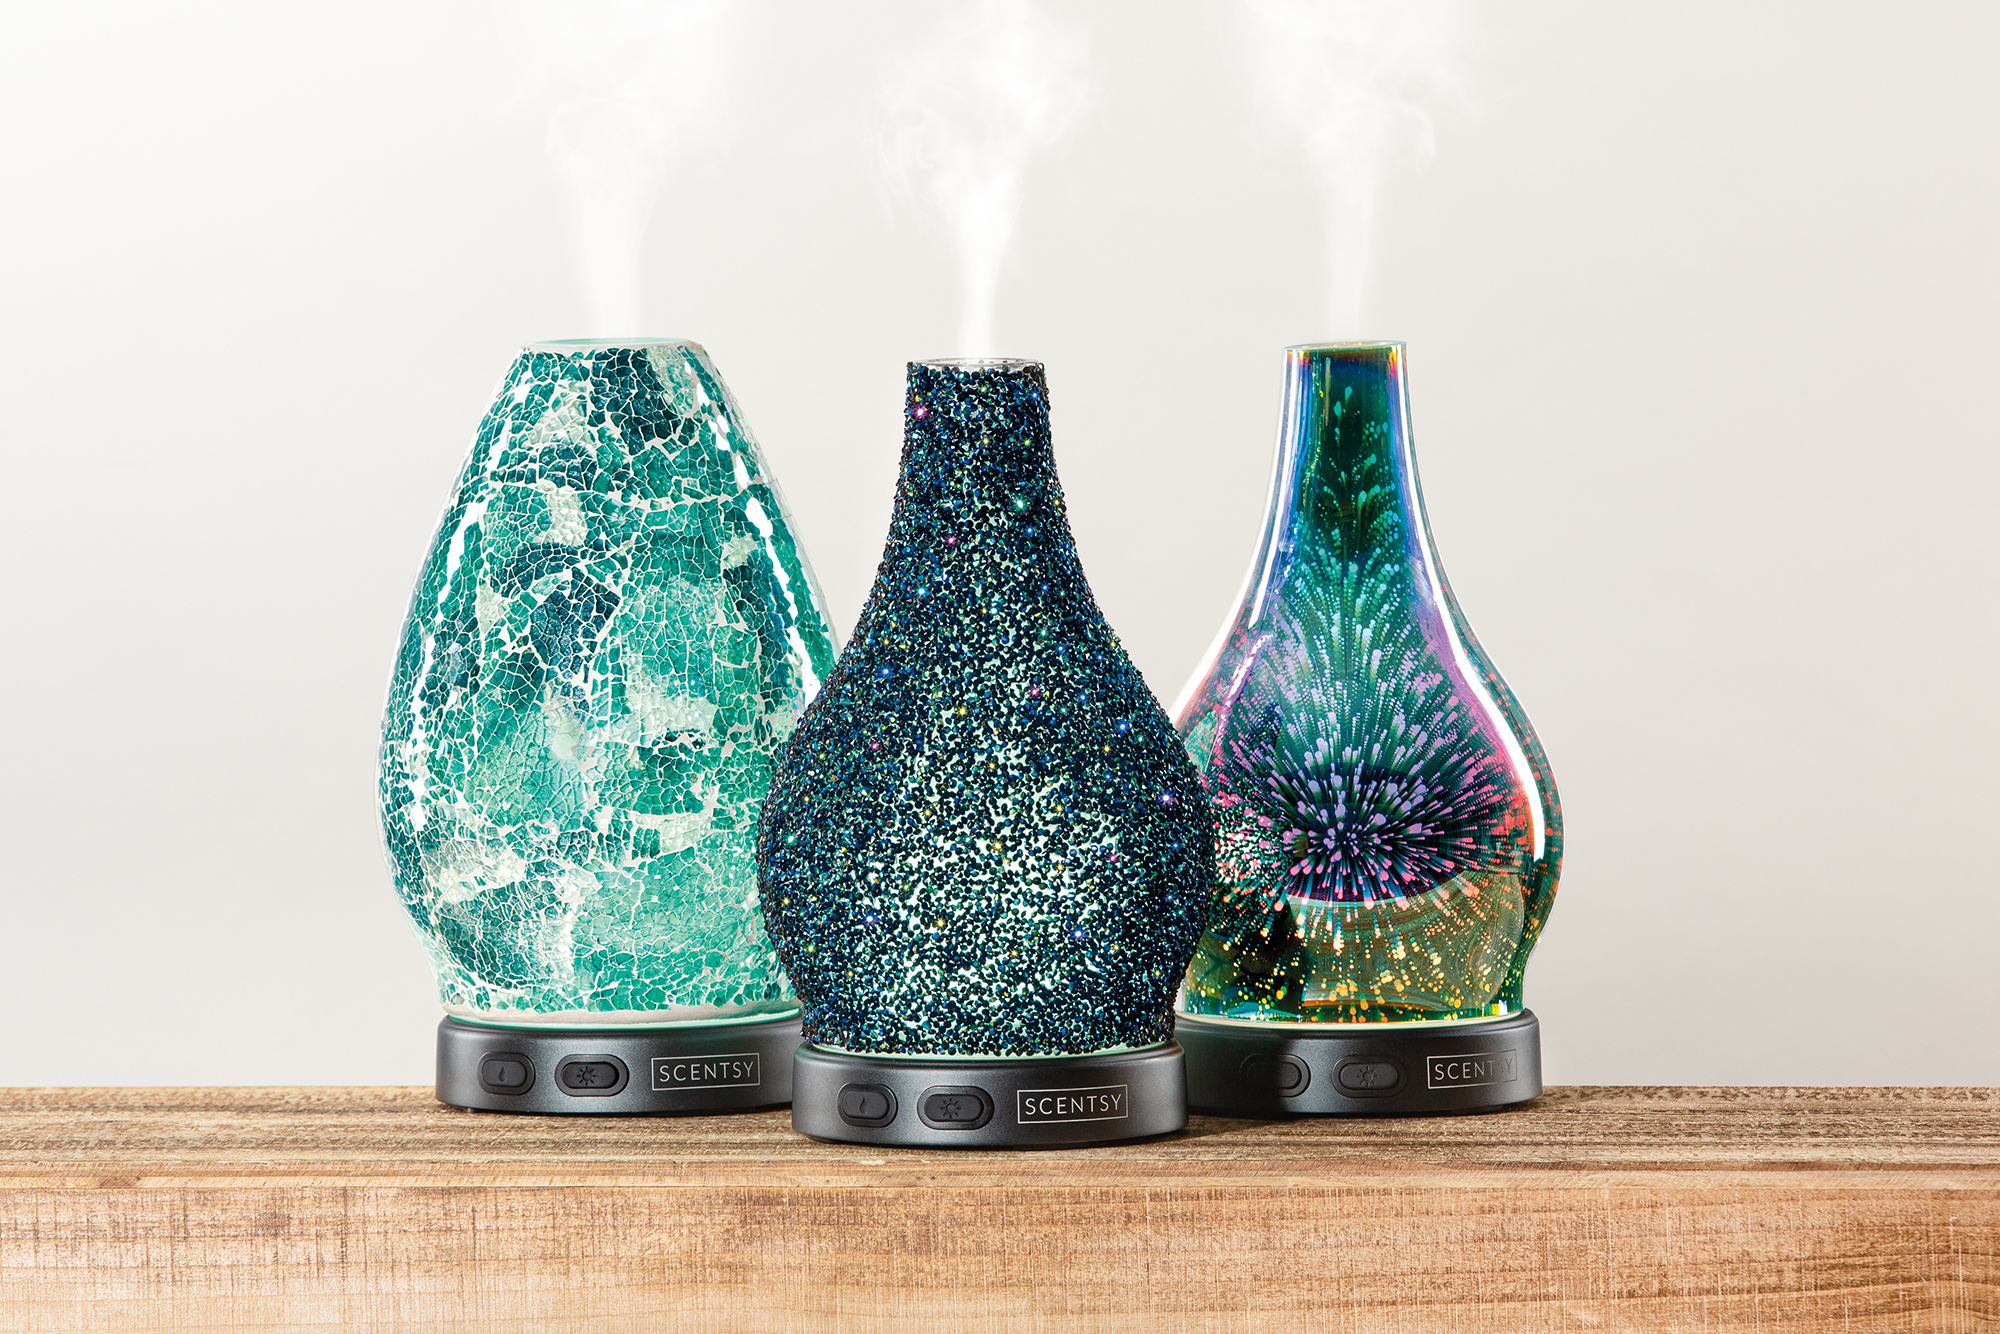 Scentsy Awaken, Stargazer, and Reflect Diffusers